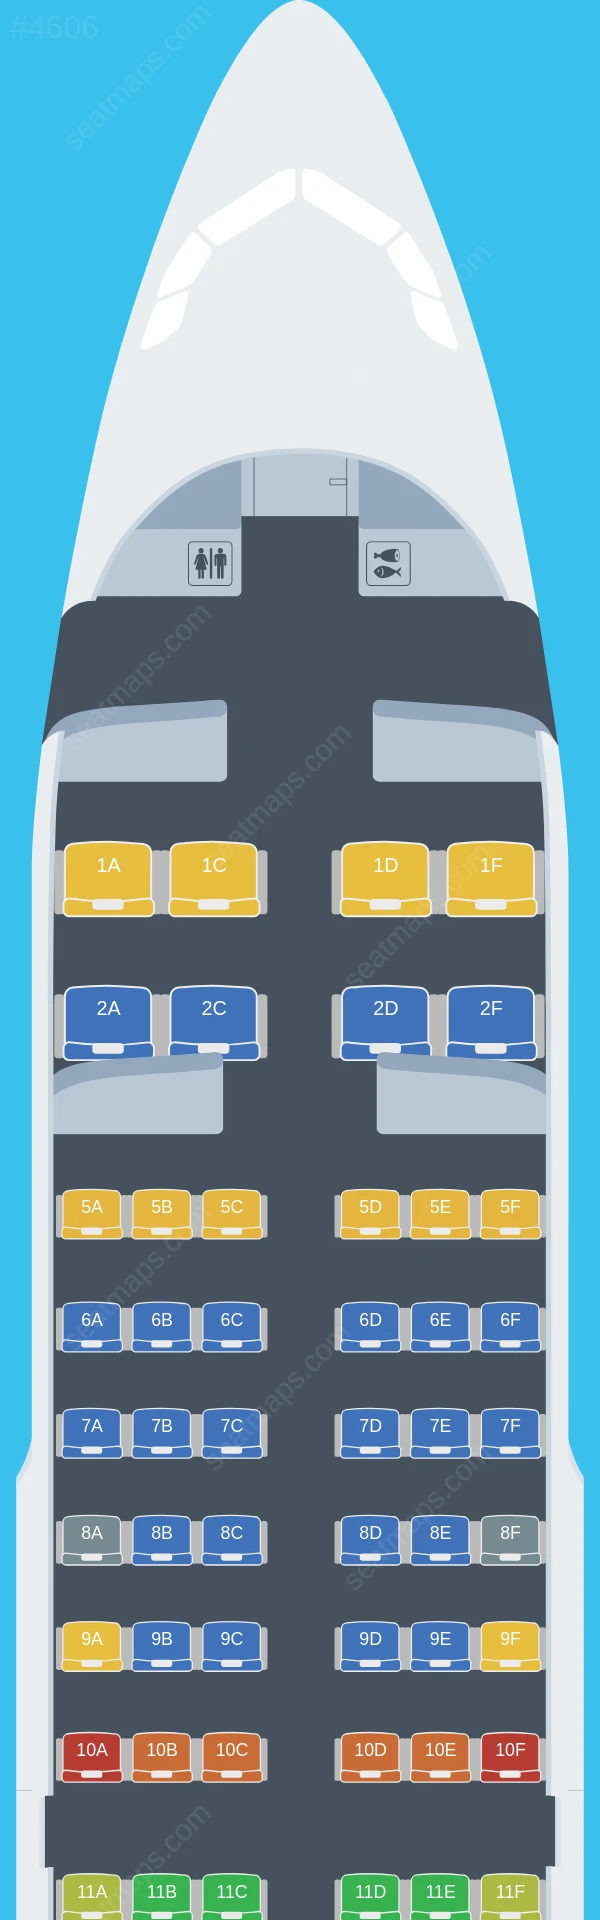 Chongqing Airlines Airbus A319-100 seatmap preview